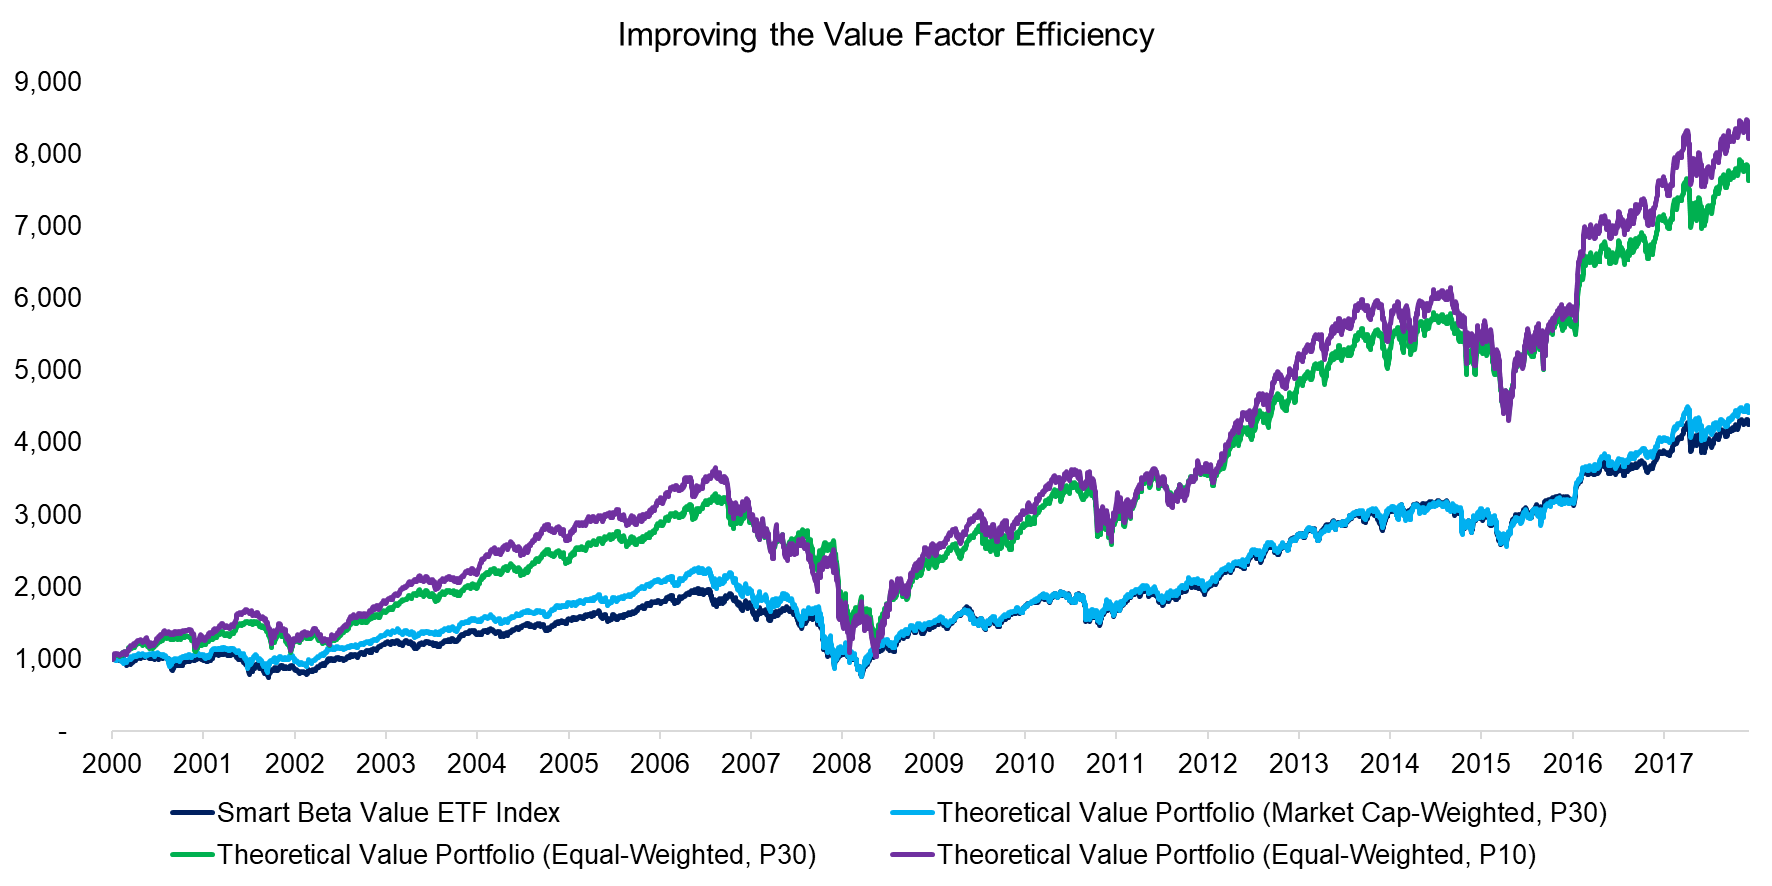 Improving the Value Factor Efficiency